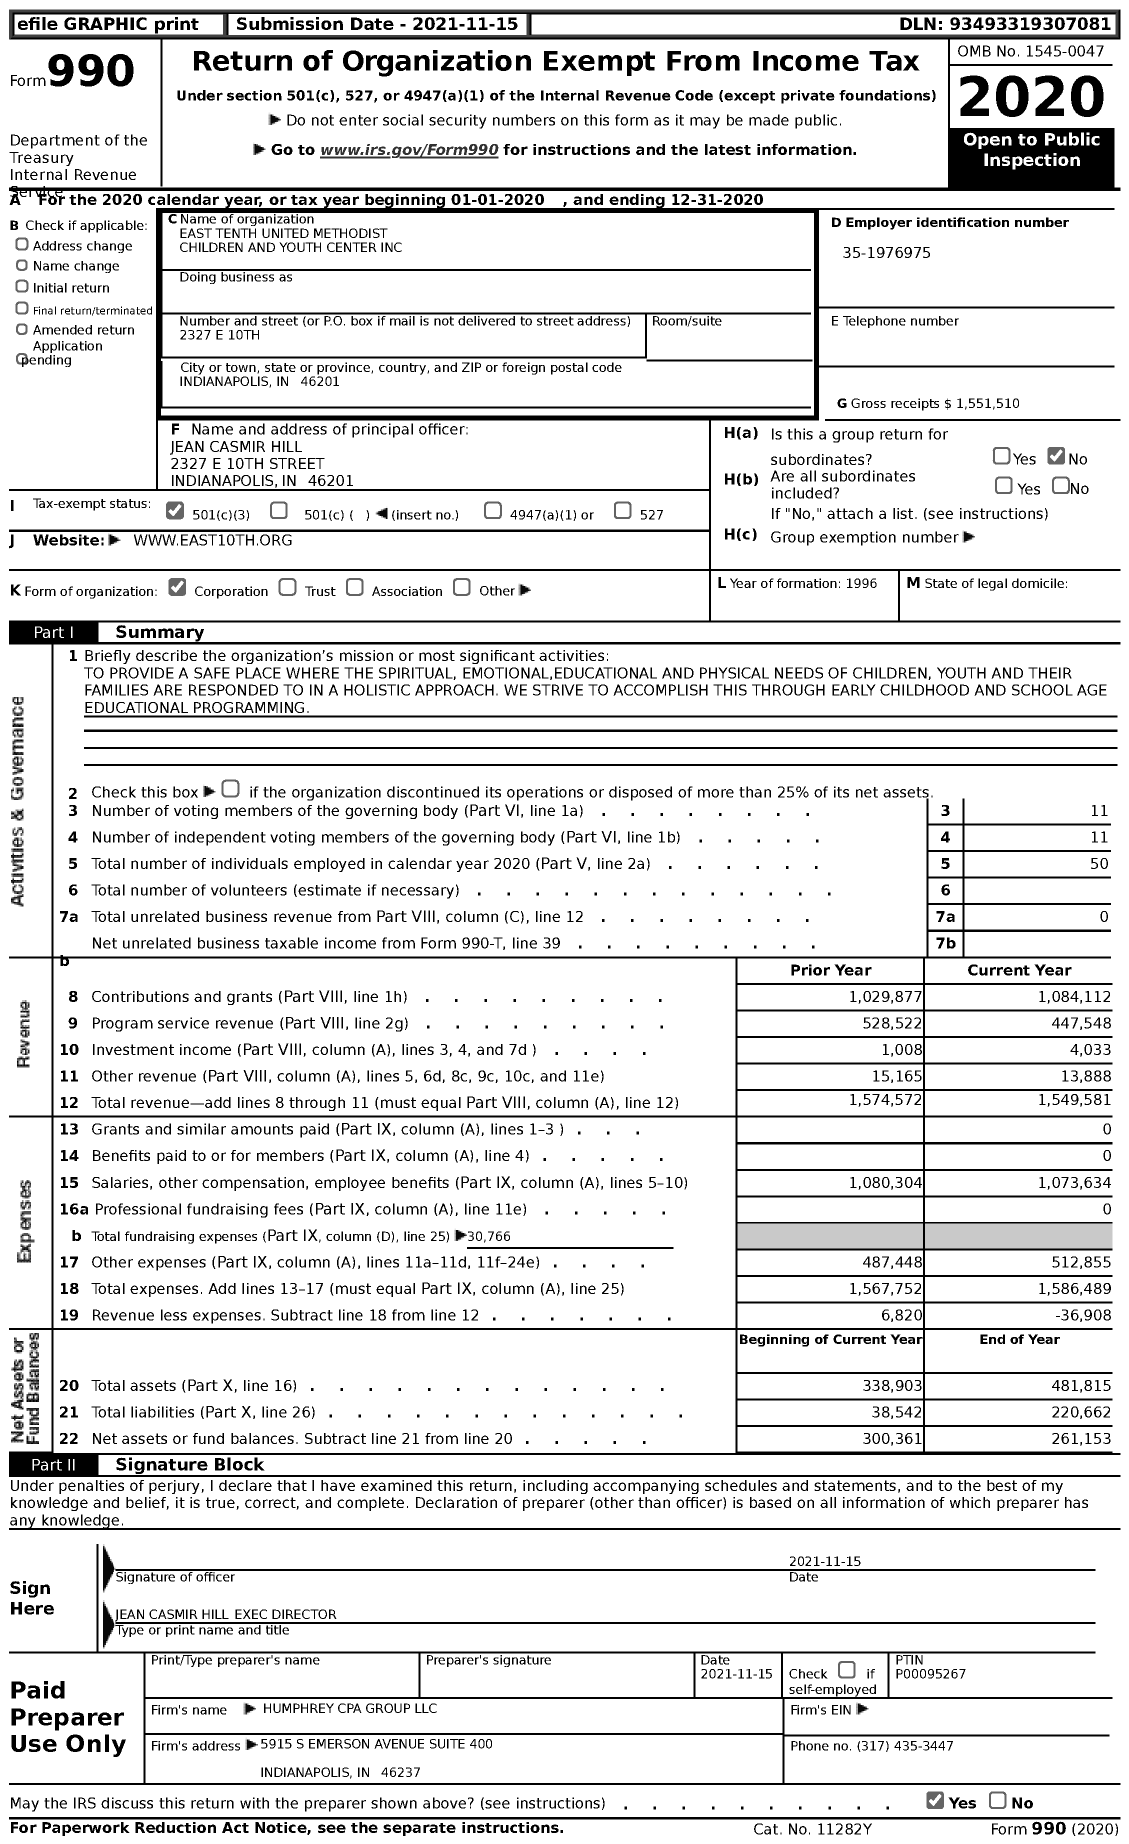 Image of first page of 2020 Form 990 for East Tenth United Methodist Children AND Youth Center